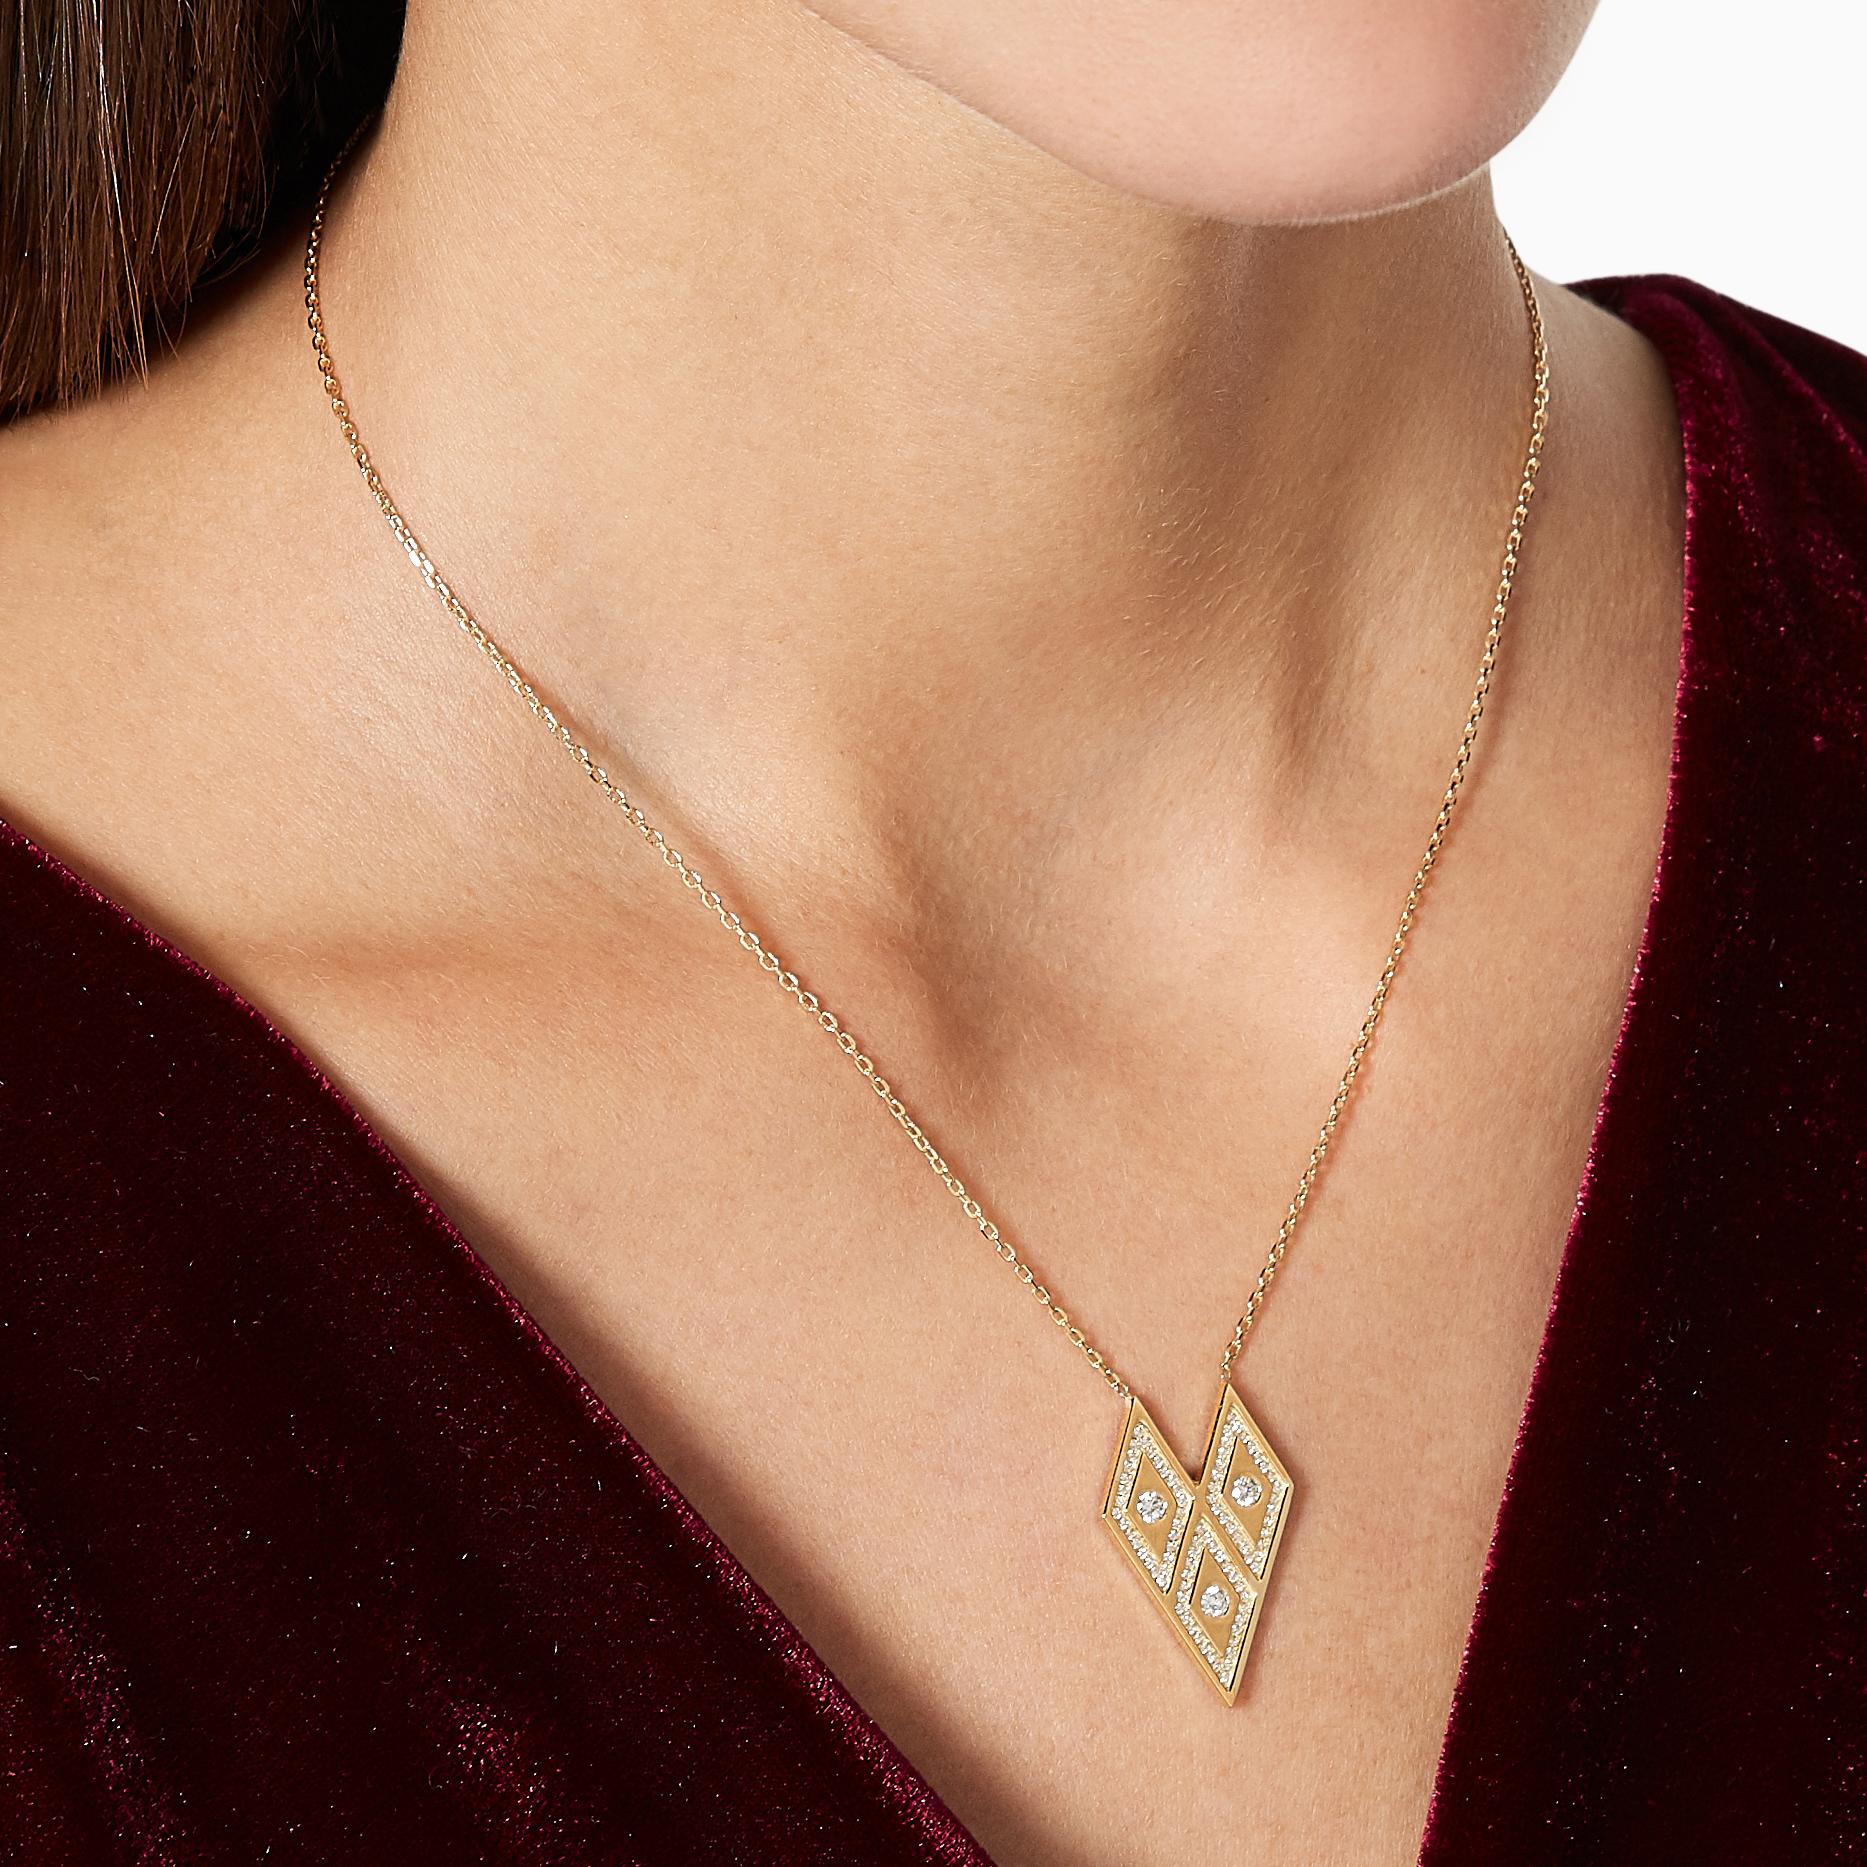 18kt yellow gold necklace with diamonds from Ralph Masri's Heliopolis collection, inspired by ancient Roman patterns and motifs.

Lobster clasp. Comes with several length options.

Available in yellow, rose or white gold.